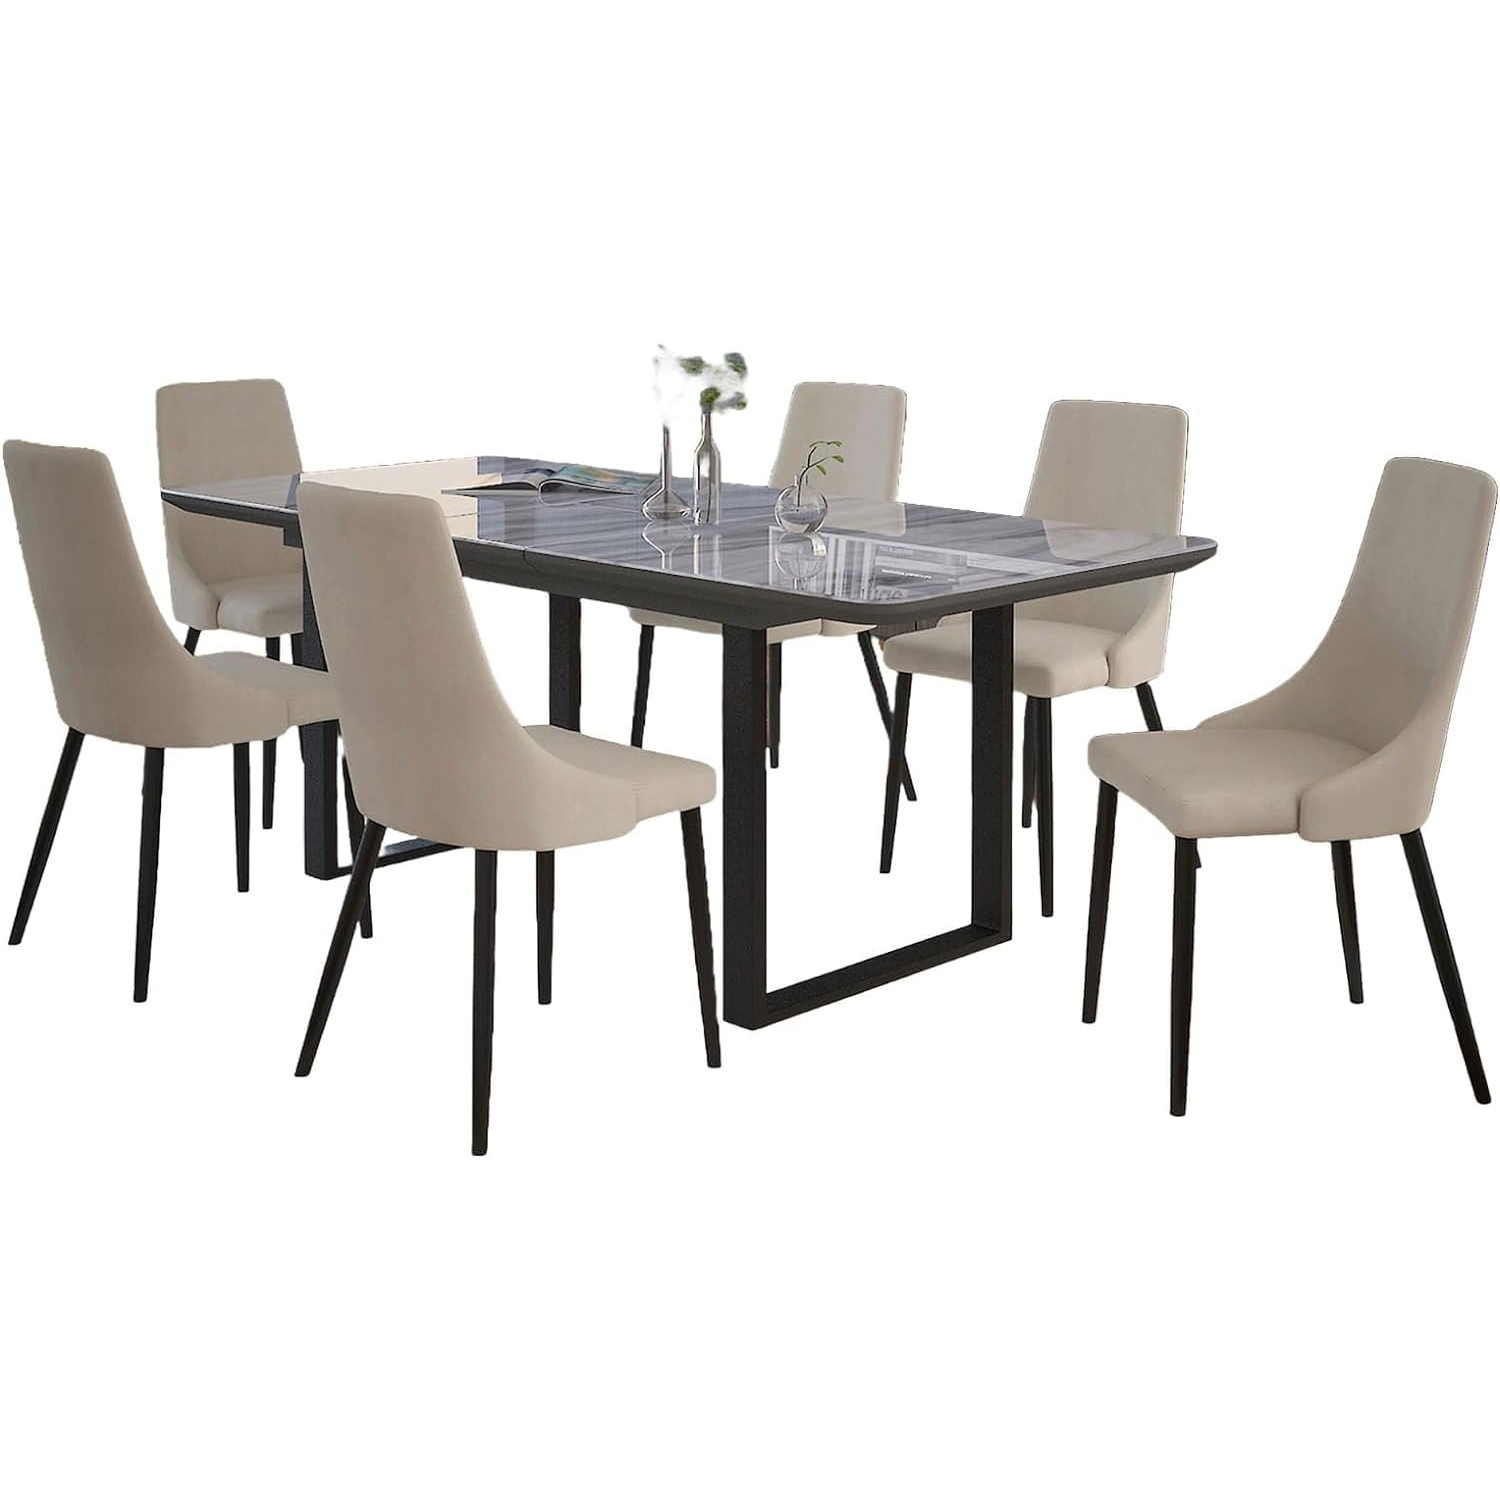 Cosmic Homes Dining Table Set for 6 in Black with Beige Chair | Chaise de Cuisine, Dining Chair for Modern Kitchen | Small Kitchen Table & Chaises Salle a Manger